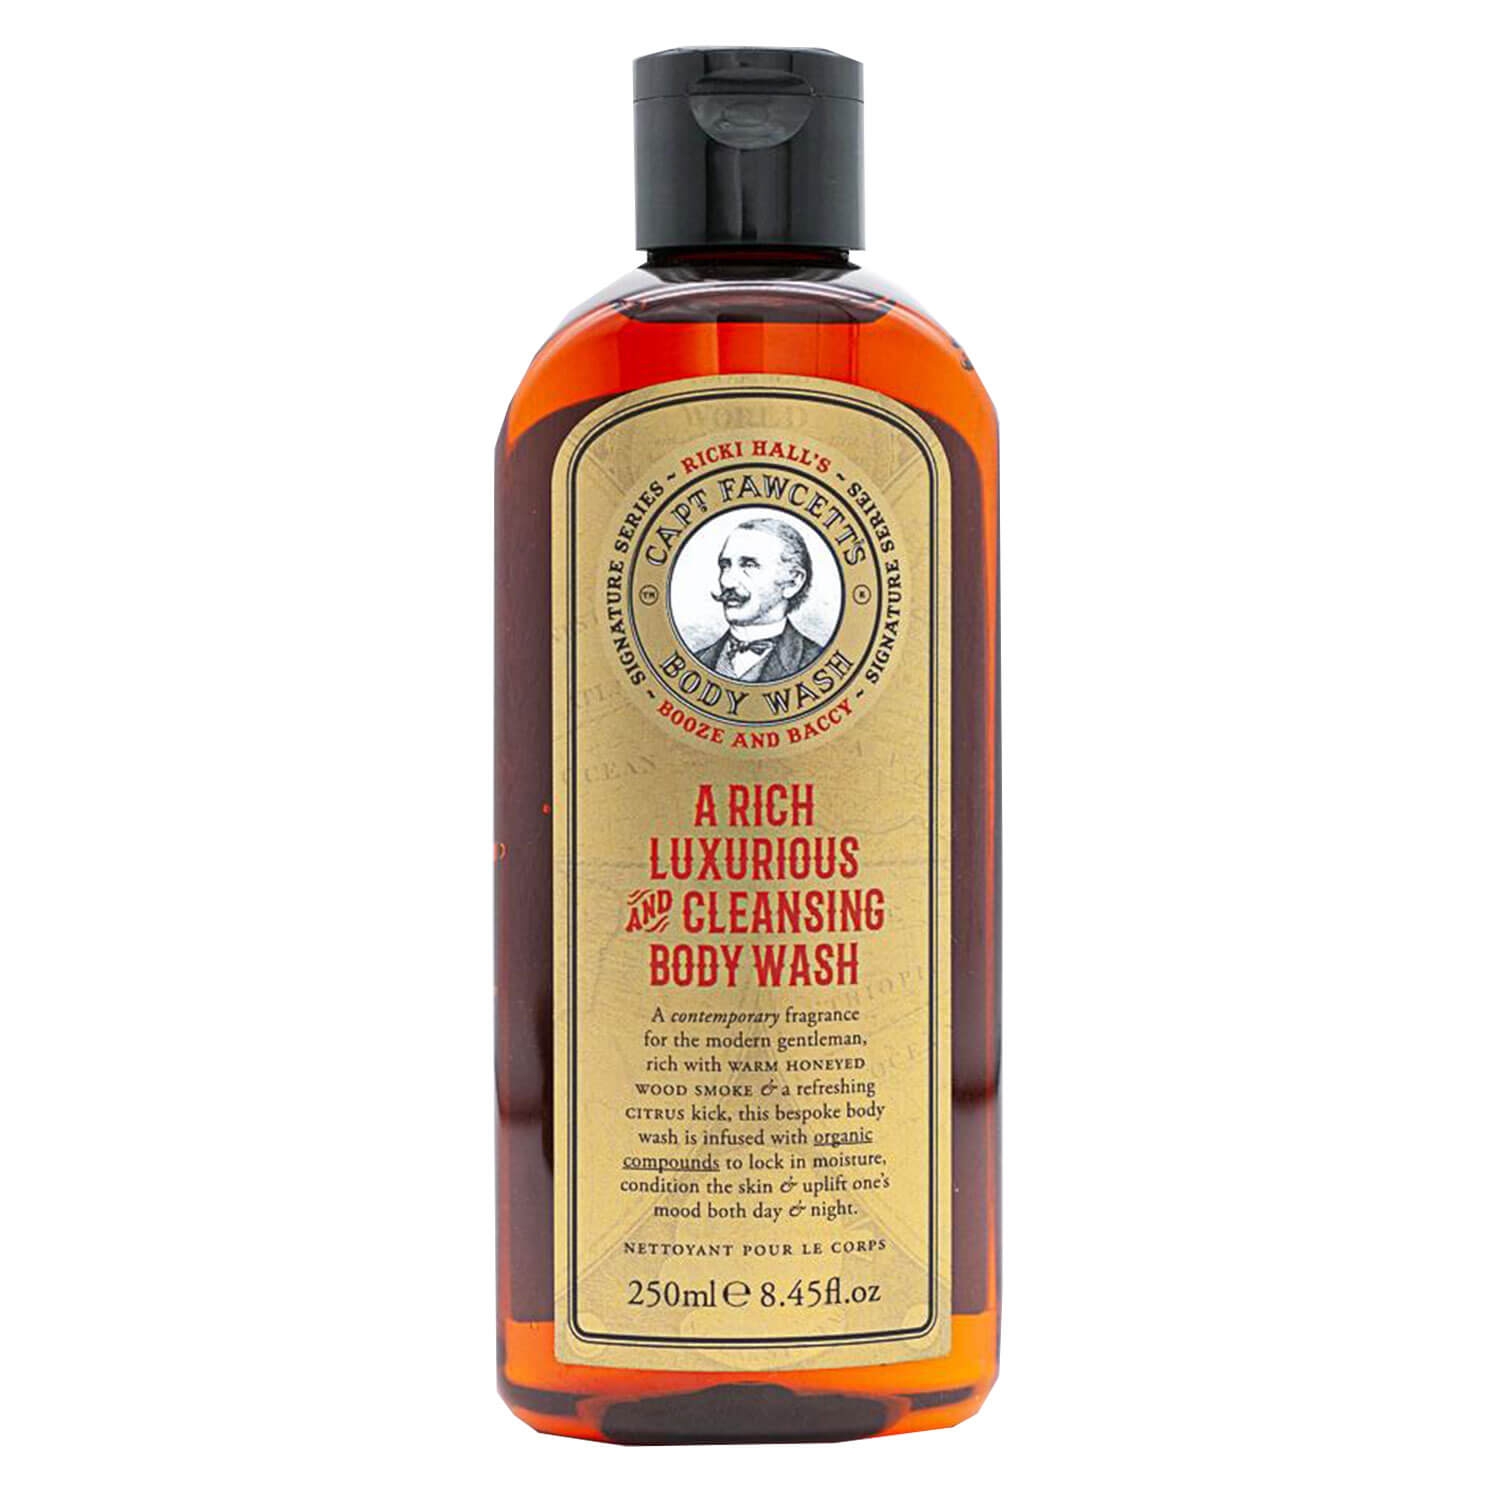 Product image from Capt. Fawcett Care - Ricki Hall's Booze & Baccy Body Wash